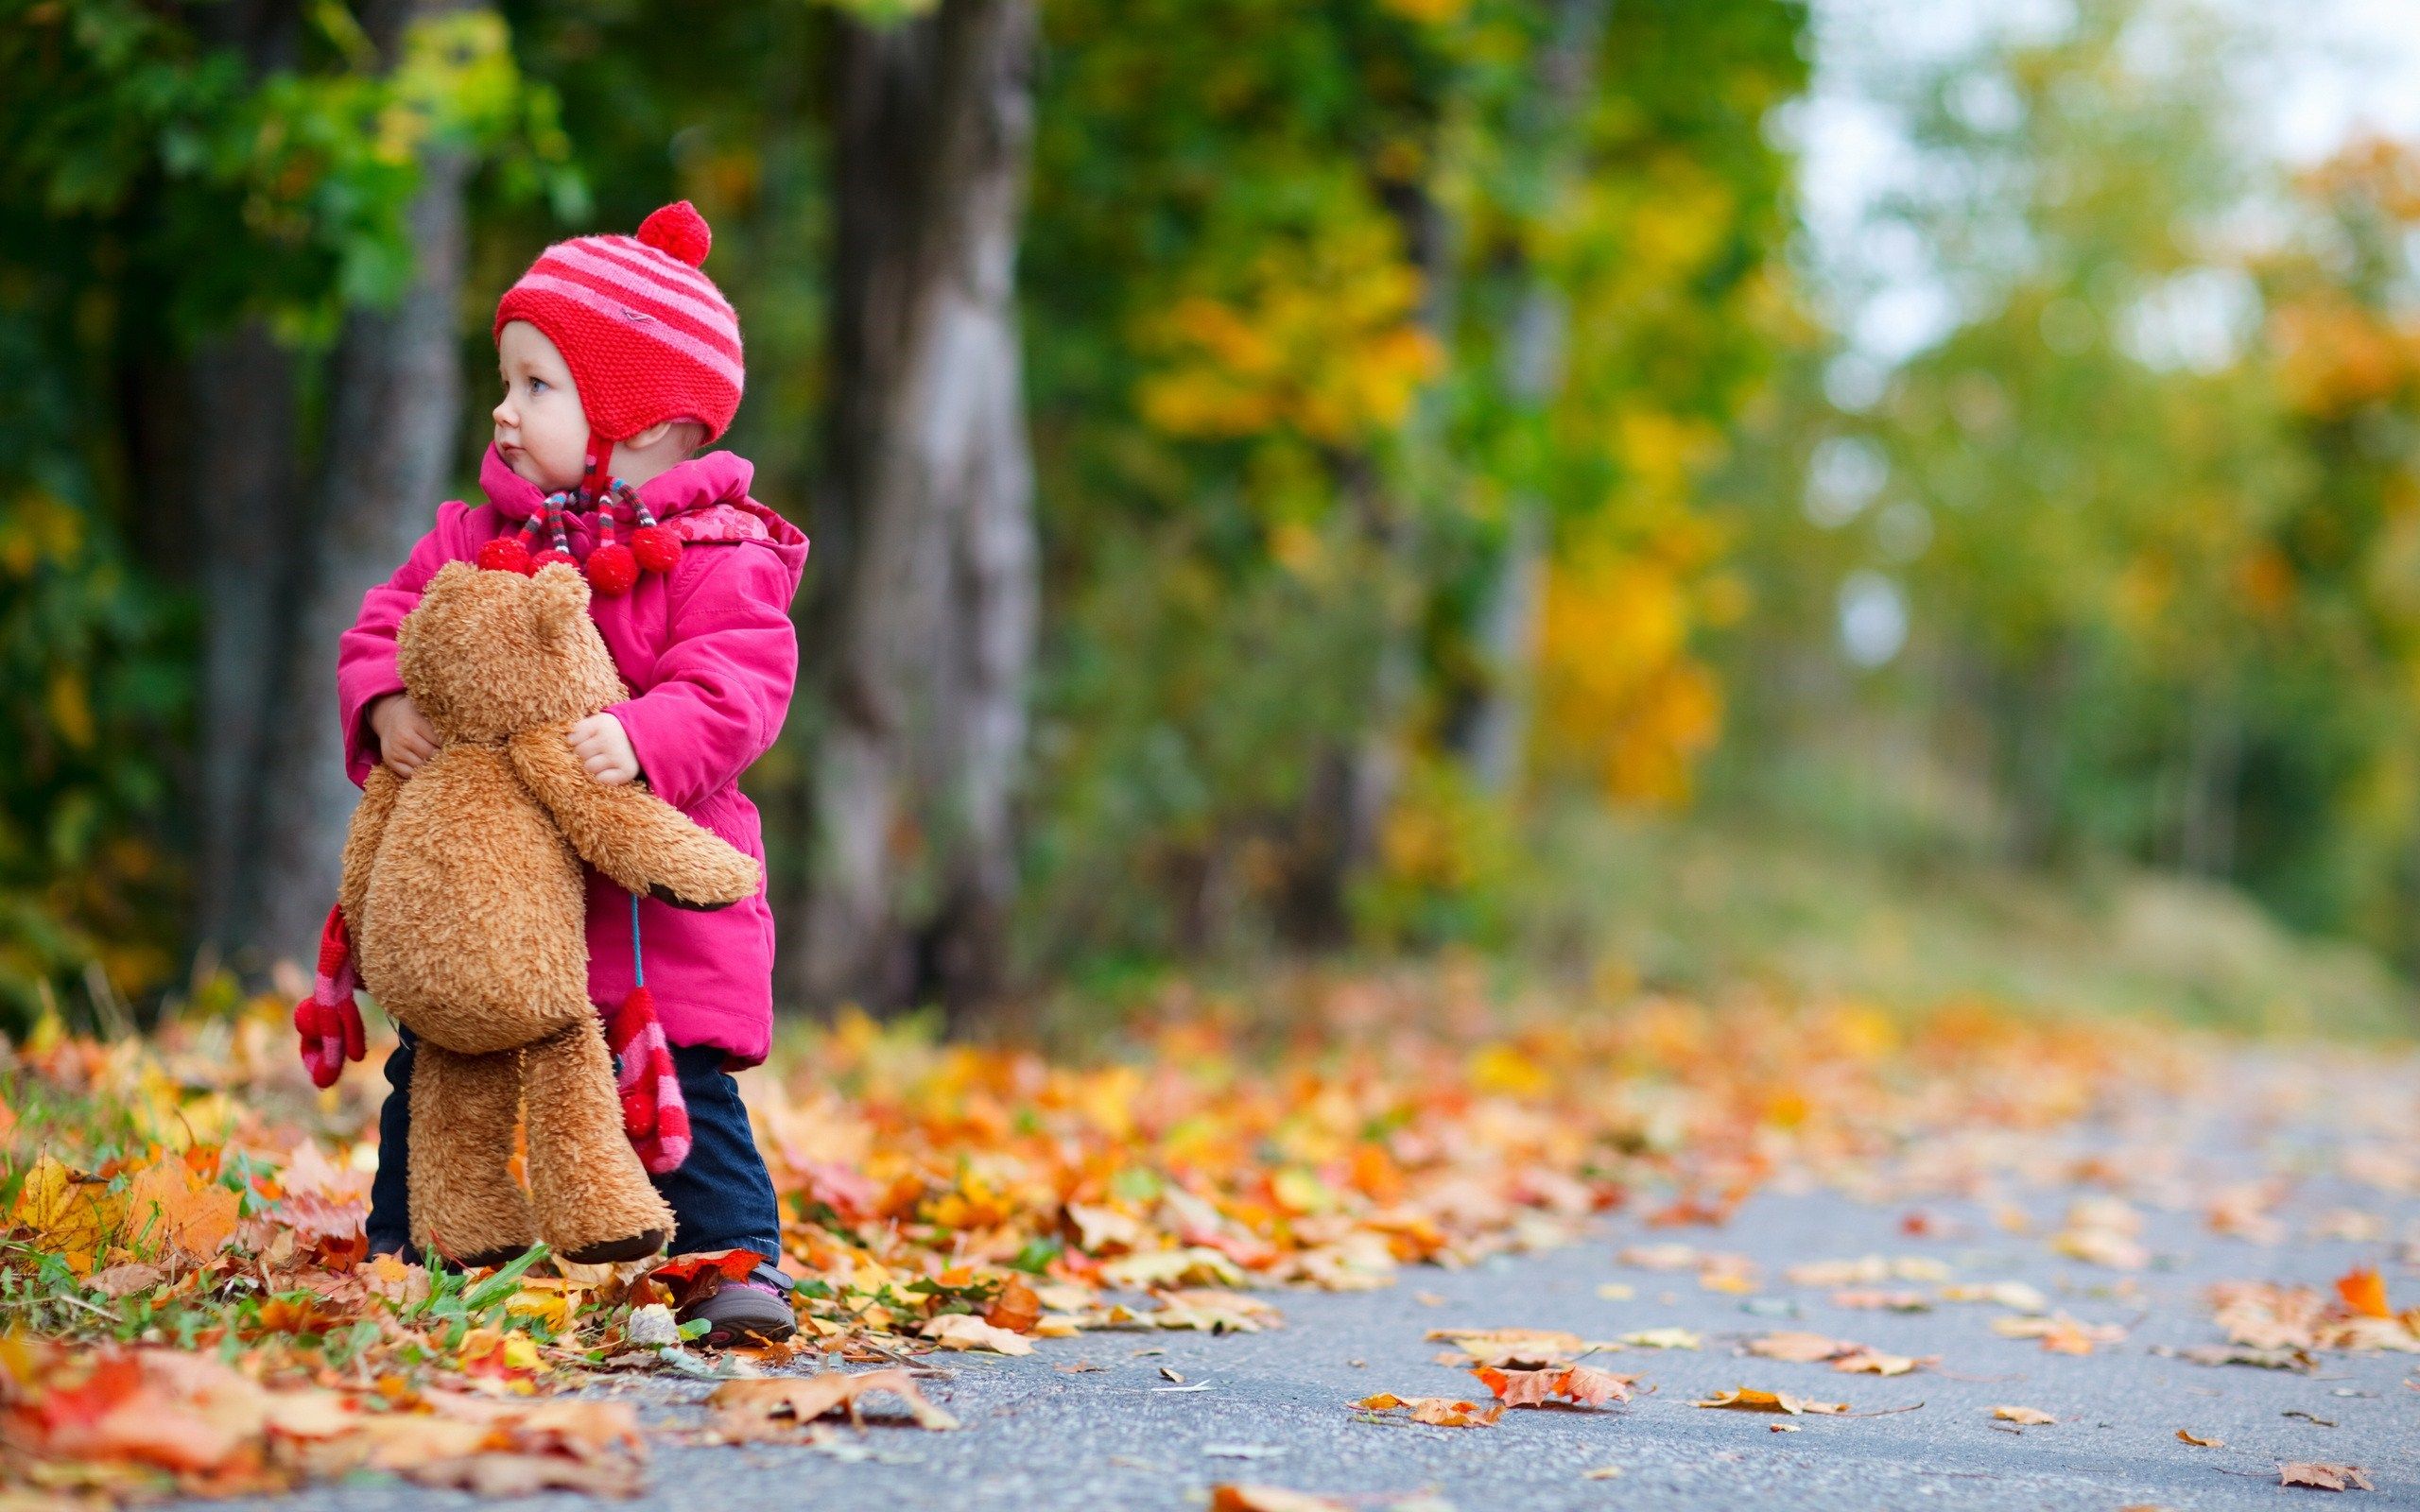 child-girl-bear-toy-autumn-leaves-nature-photo-hd-wallpaper ...